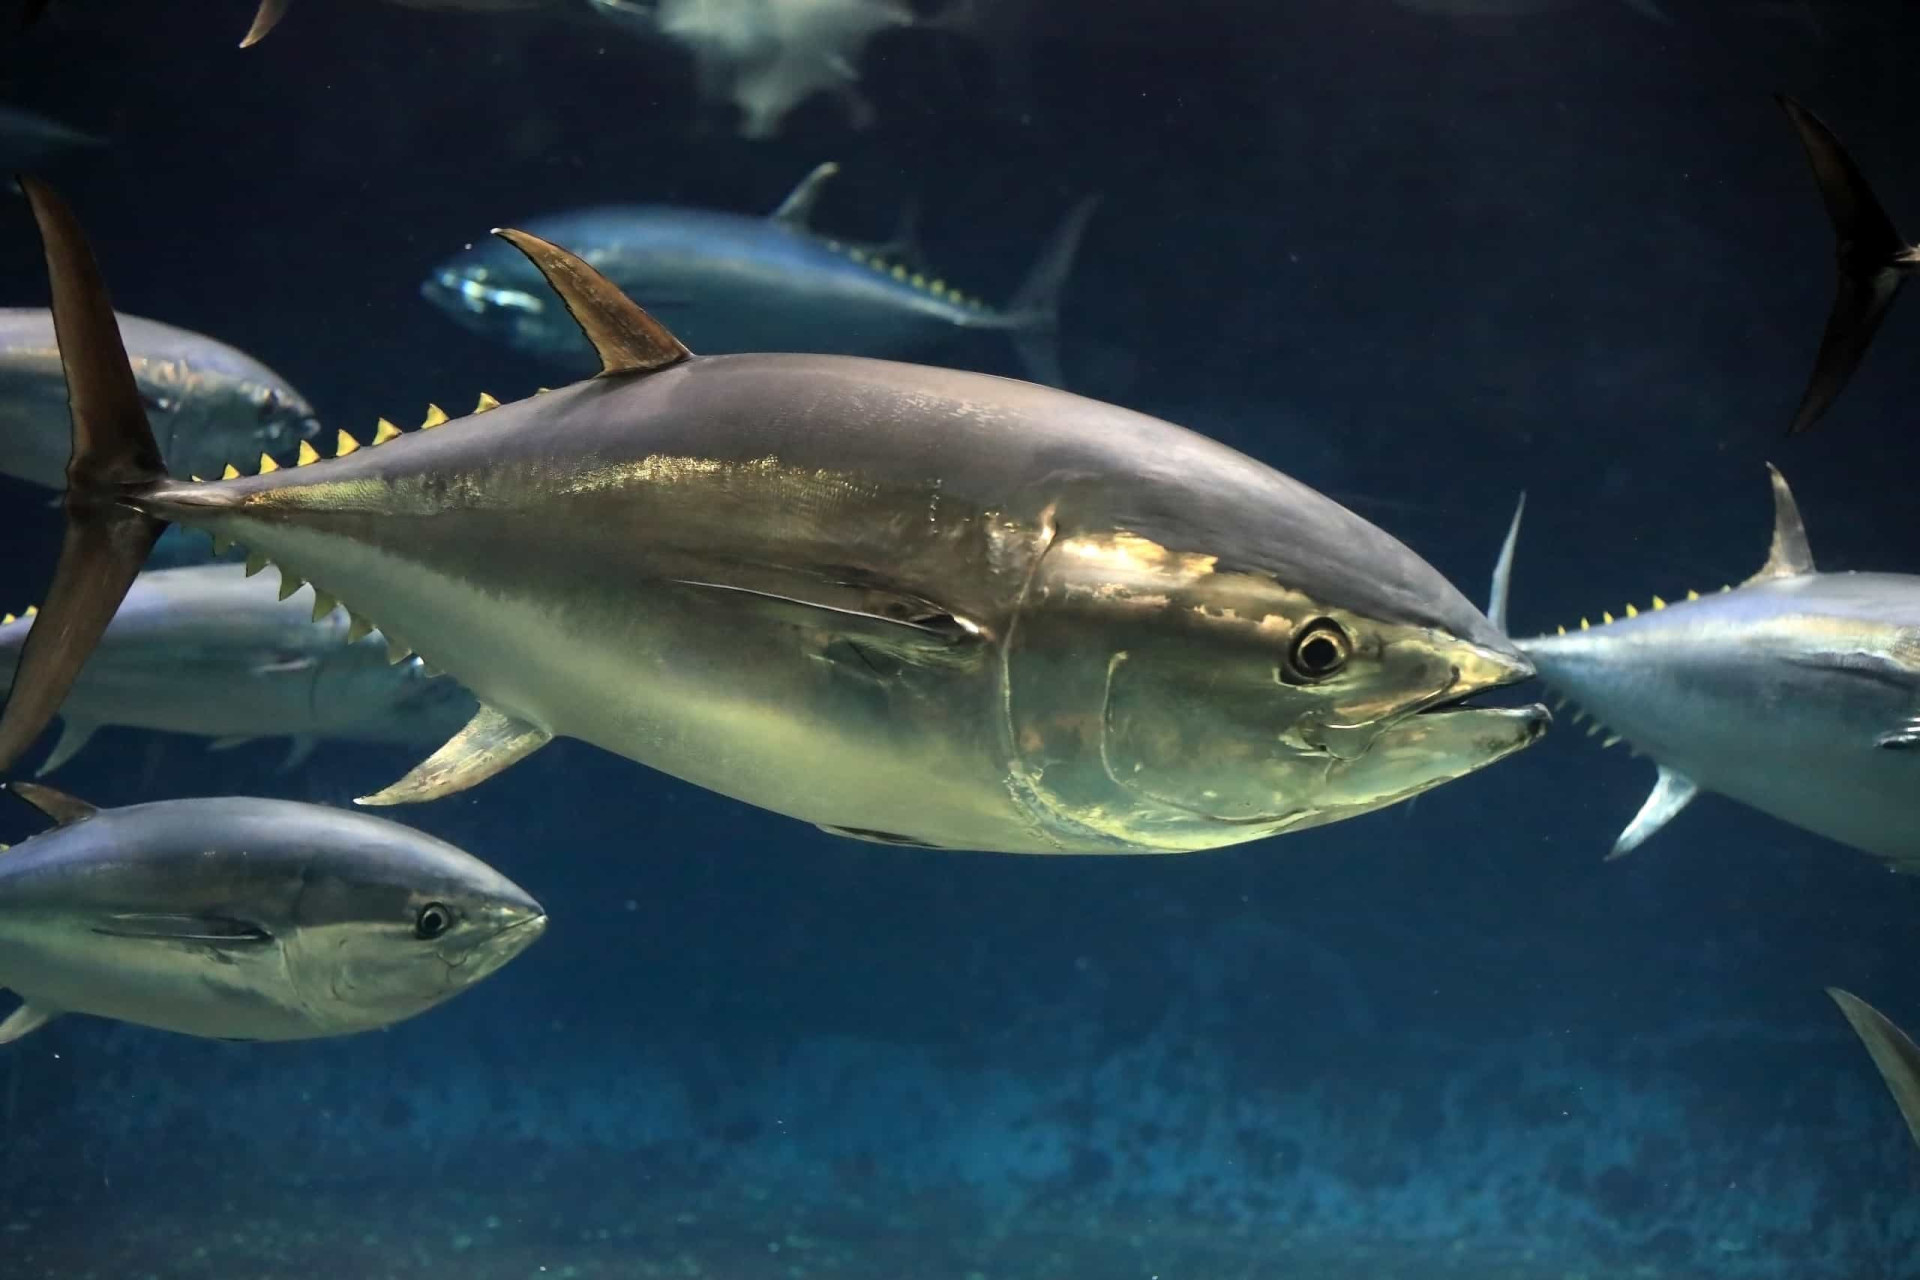 <p>Pacific bluefin tuna, classified as a threatened species by the International Union for Conservation of Nature, are known for their size and longevity, with a lifespan of up to 40 years. These tunas inhabit the northern Pacific Ocean, spanning the coastlines of East Asia to western North America.</p><p>You may also like:<a href="https://www.starsinsider.com/n/193543?utm_source=msn.com&utm_medium=display&utm_campaign=referral_description&utm_content=578219en-en"> Celebrity siblings that fame forgot</a></p>